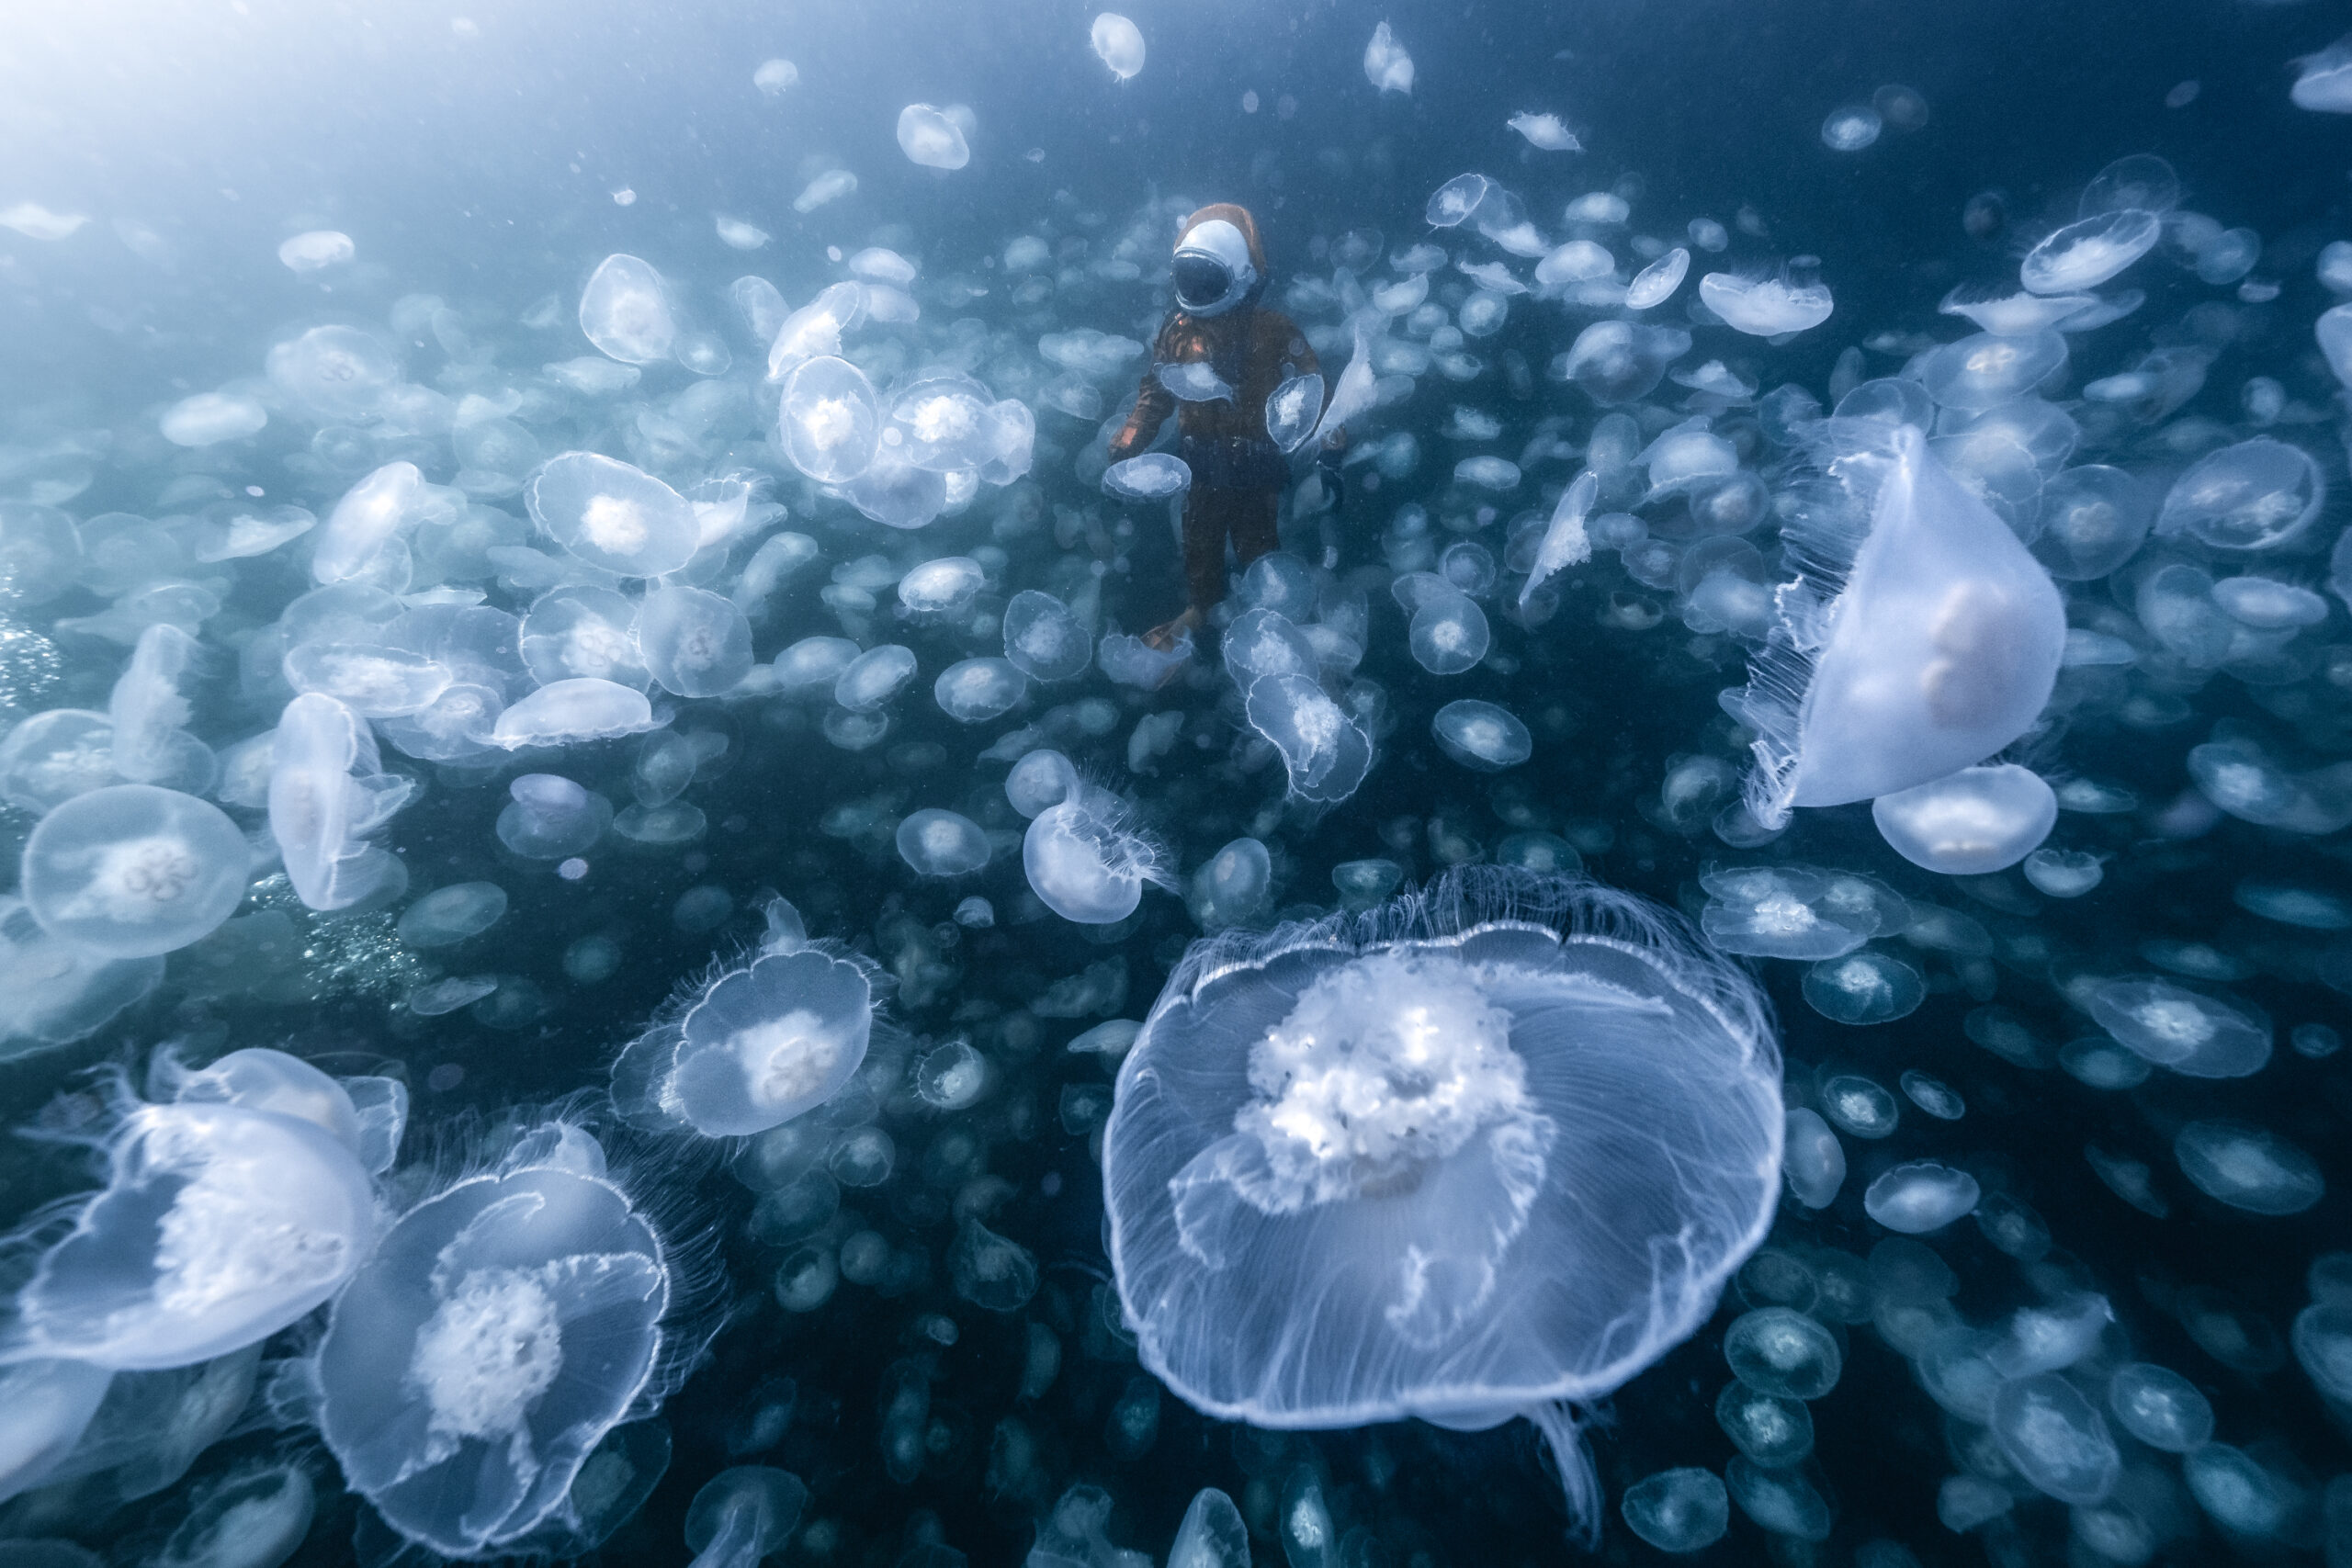 An astronaut swims amongst a large bloom of moon jellyfish off the coast of Brittish Columbia.